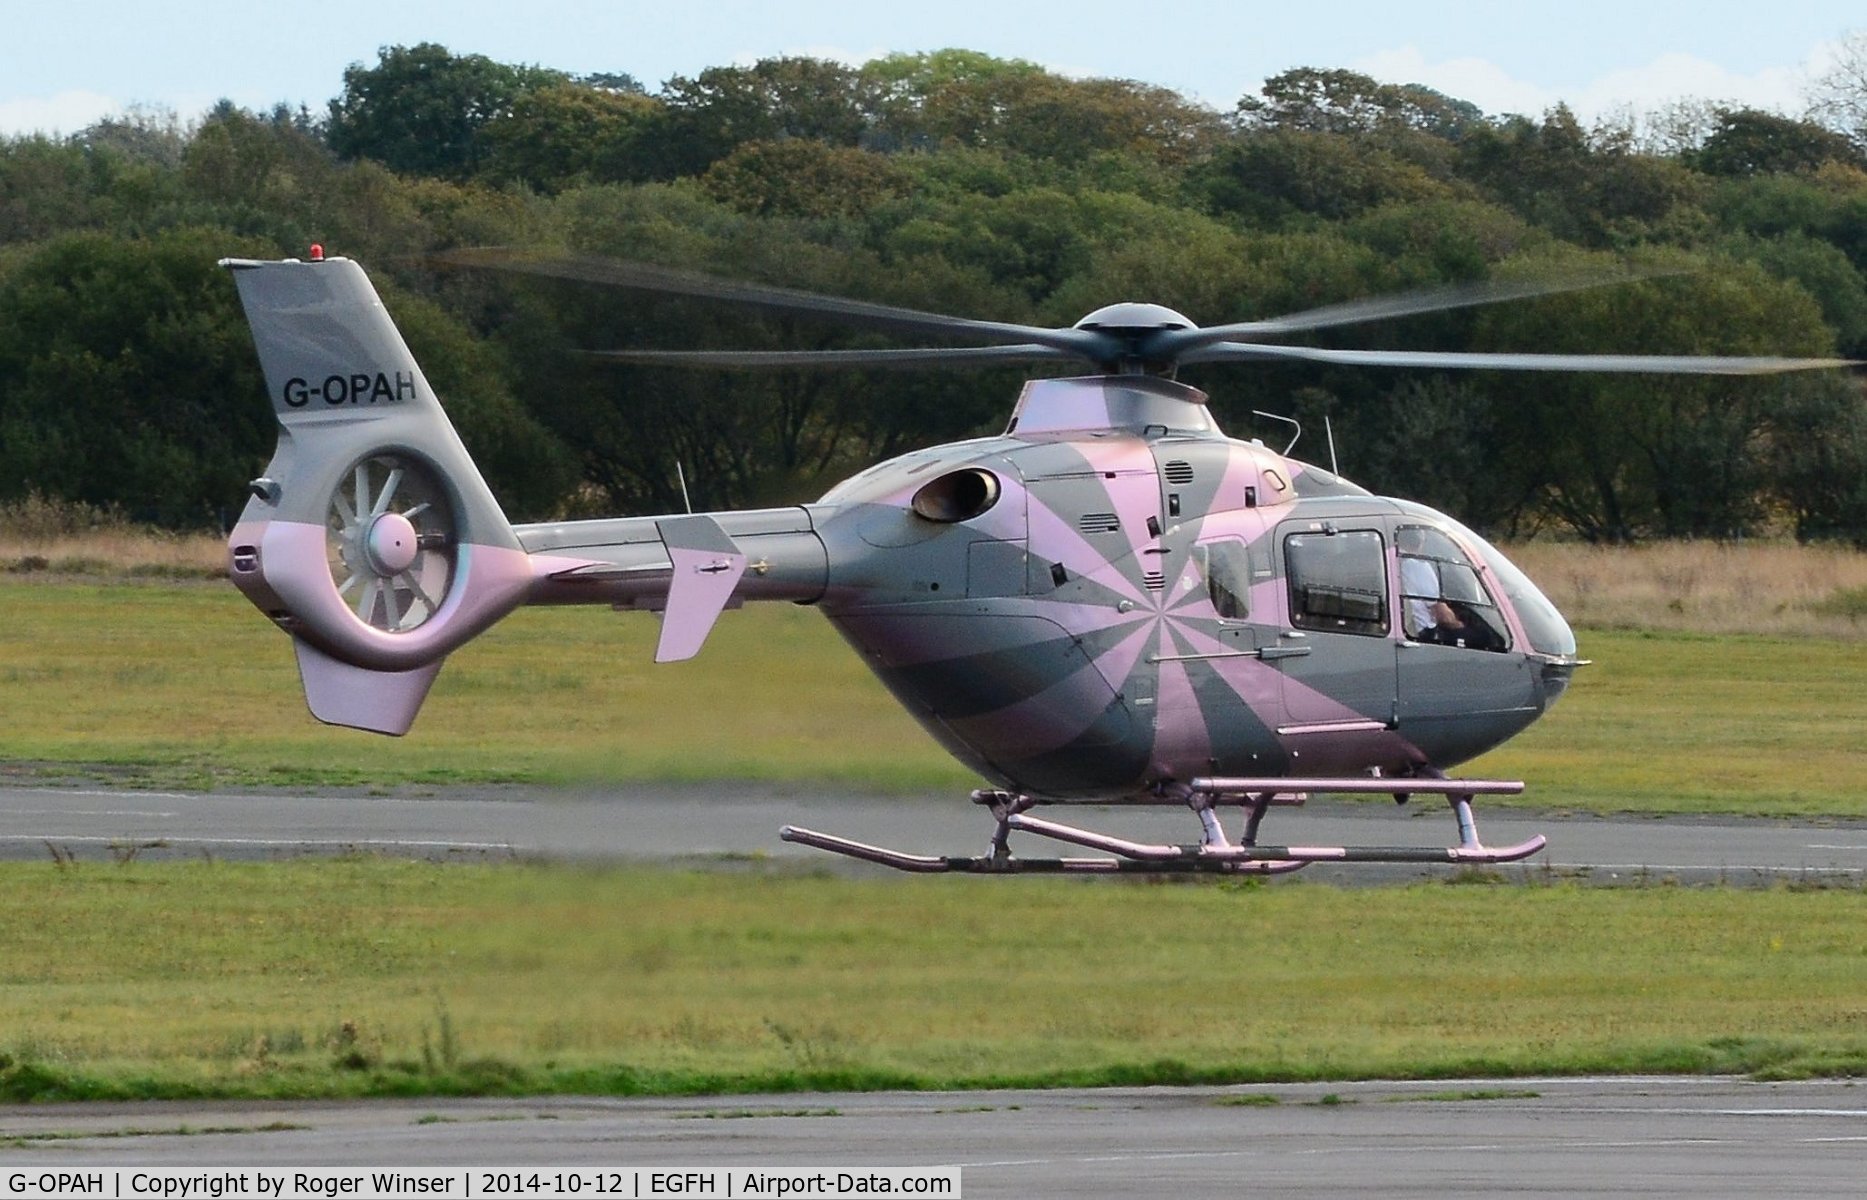 G-OPAH, 2007 Eurocopter EC-135T-2+ C/N 0635, Visiting helicopter operated by VLL Ltd. Very interesting colour scheme.